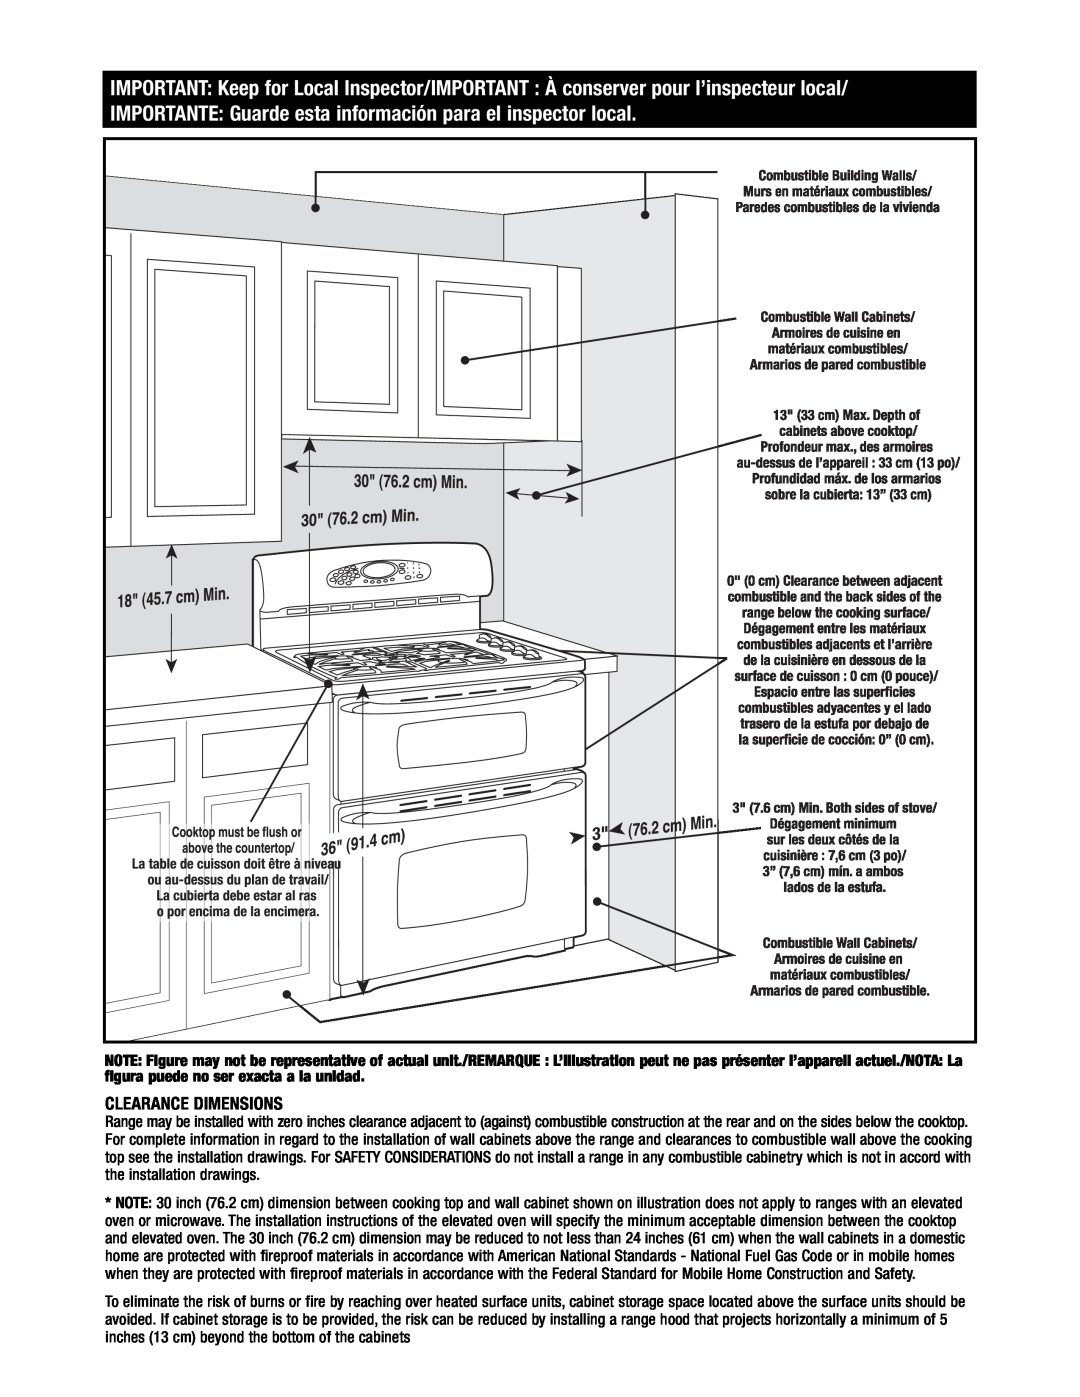 Maytag MGR6875, MGR6775 installation instructions Clearance Dimensions 